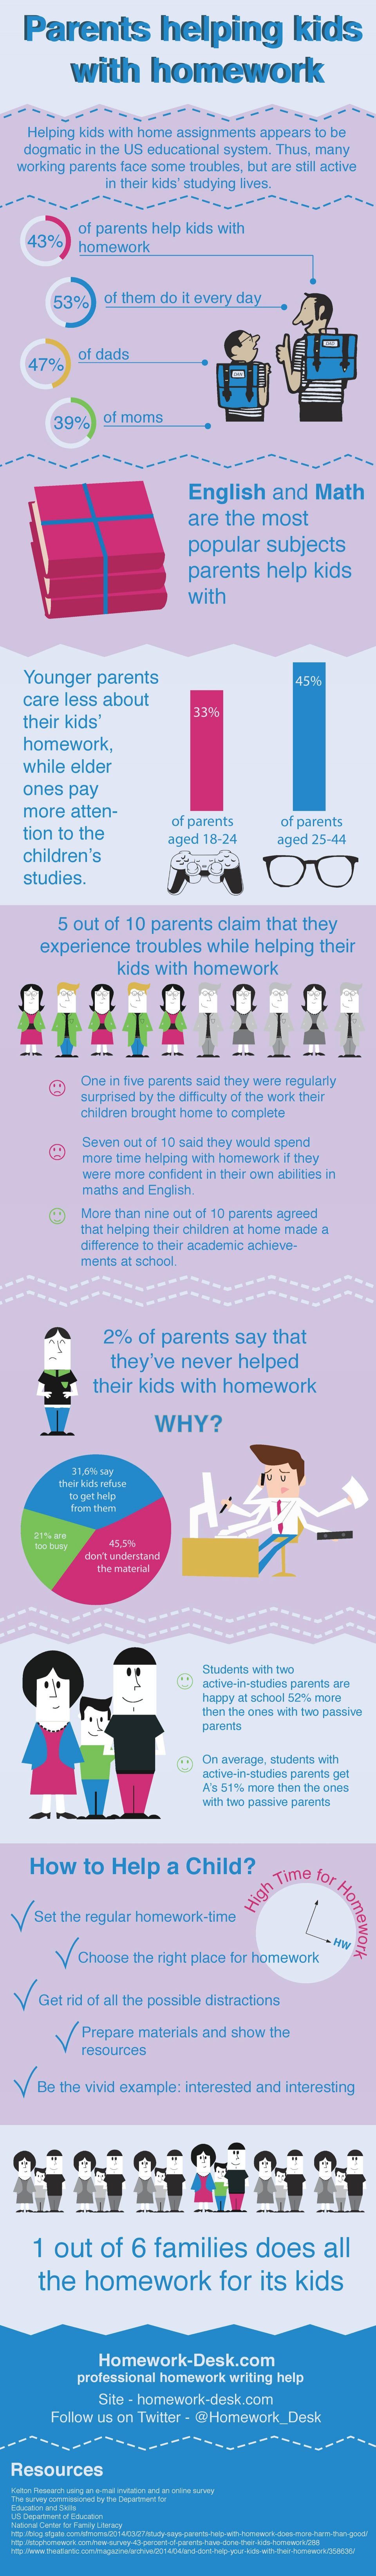 Parents Helping Kids with Homework Infographic